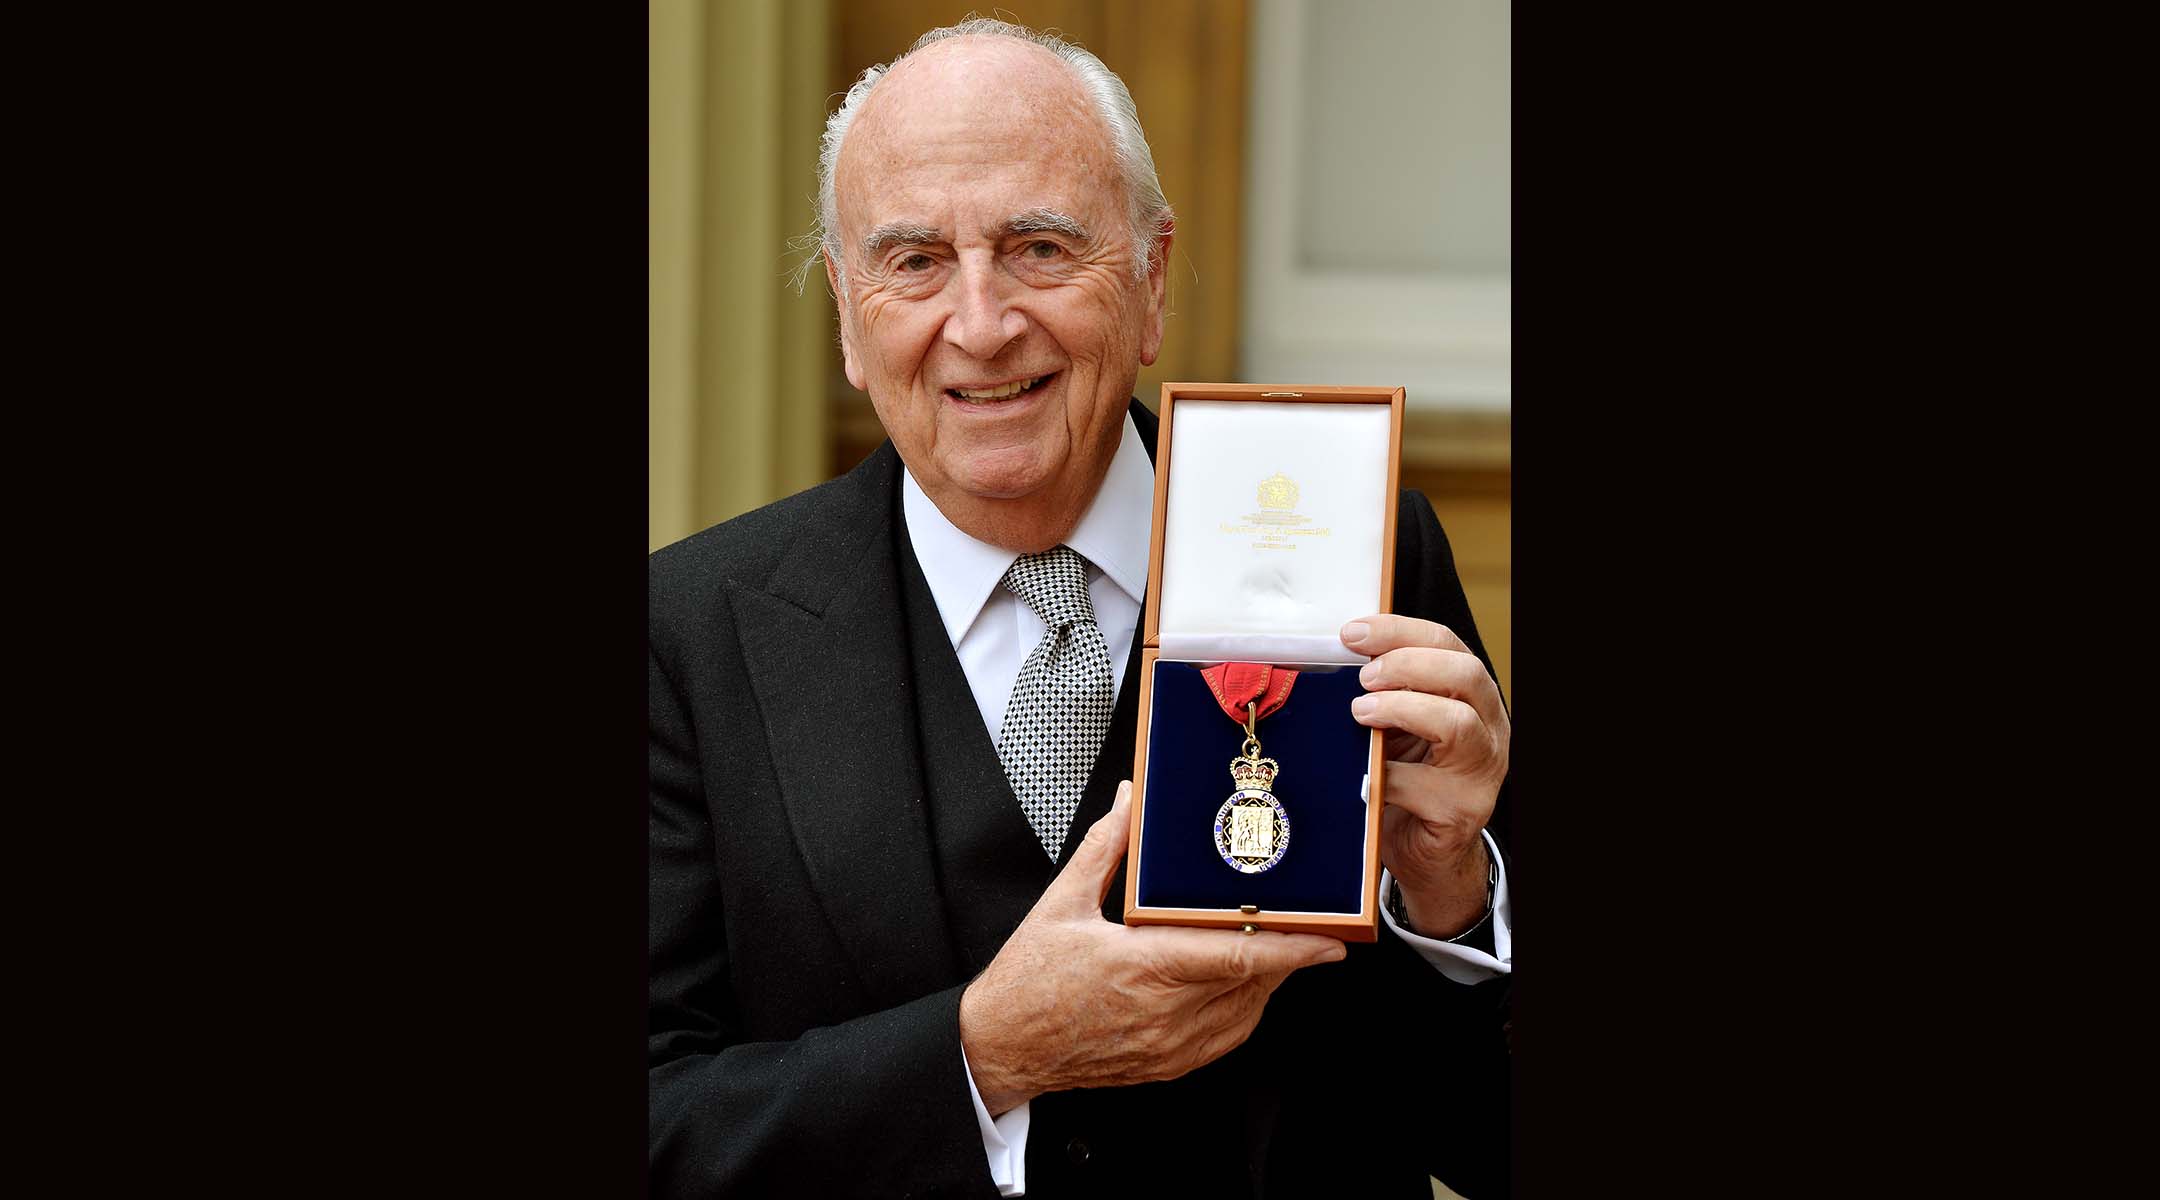 Lord David Young holds his insignia of member of the Order of the Companions of Honour after it was presented to him by the Prince of Wales in London, May 15, 2015. (John Stillwell/WPA Pool/Getty Images)